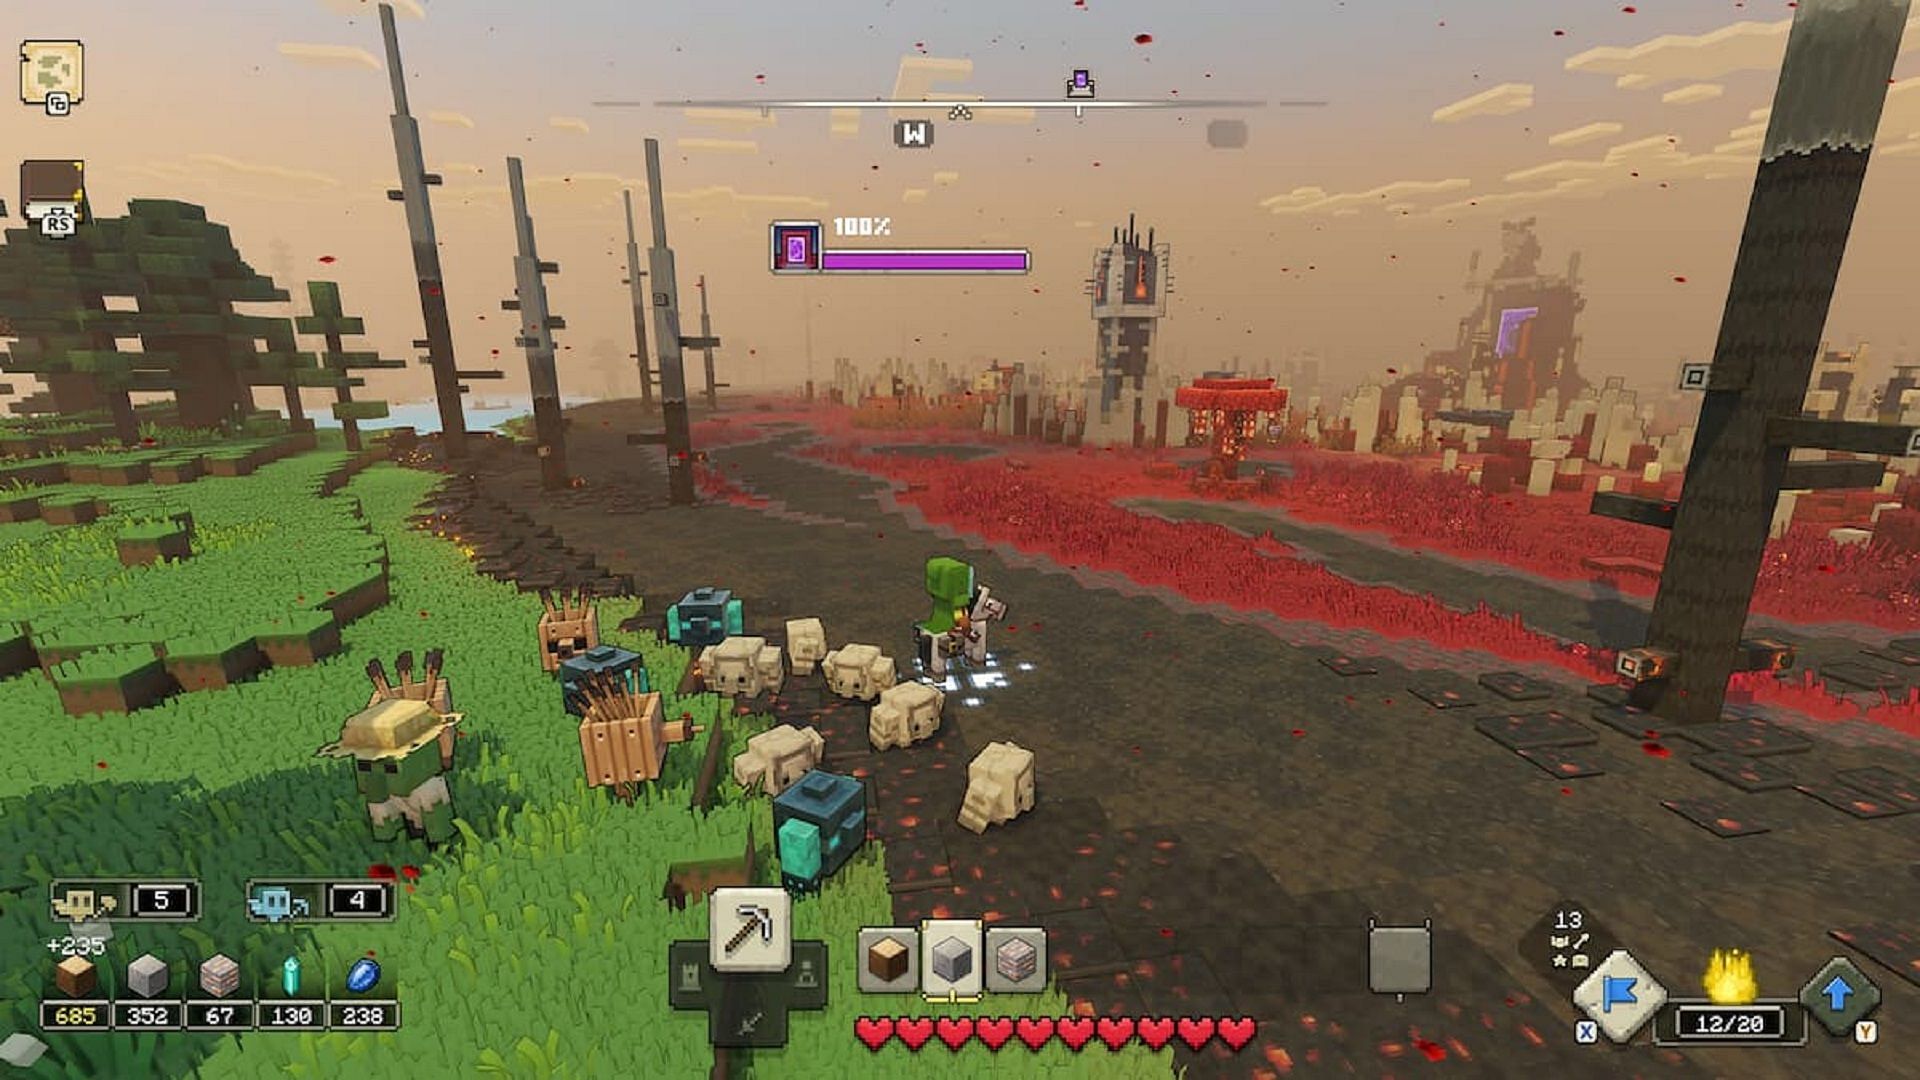 A hero leads a group of golems into battle in Minecraft Legends (Image via Mojang)